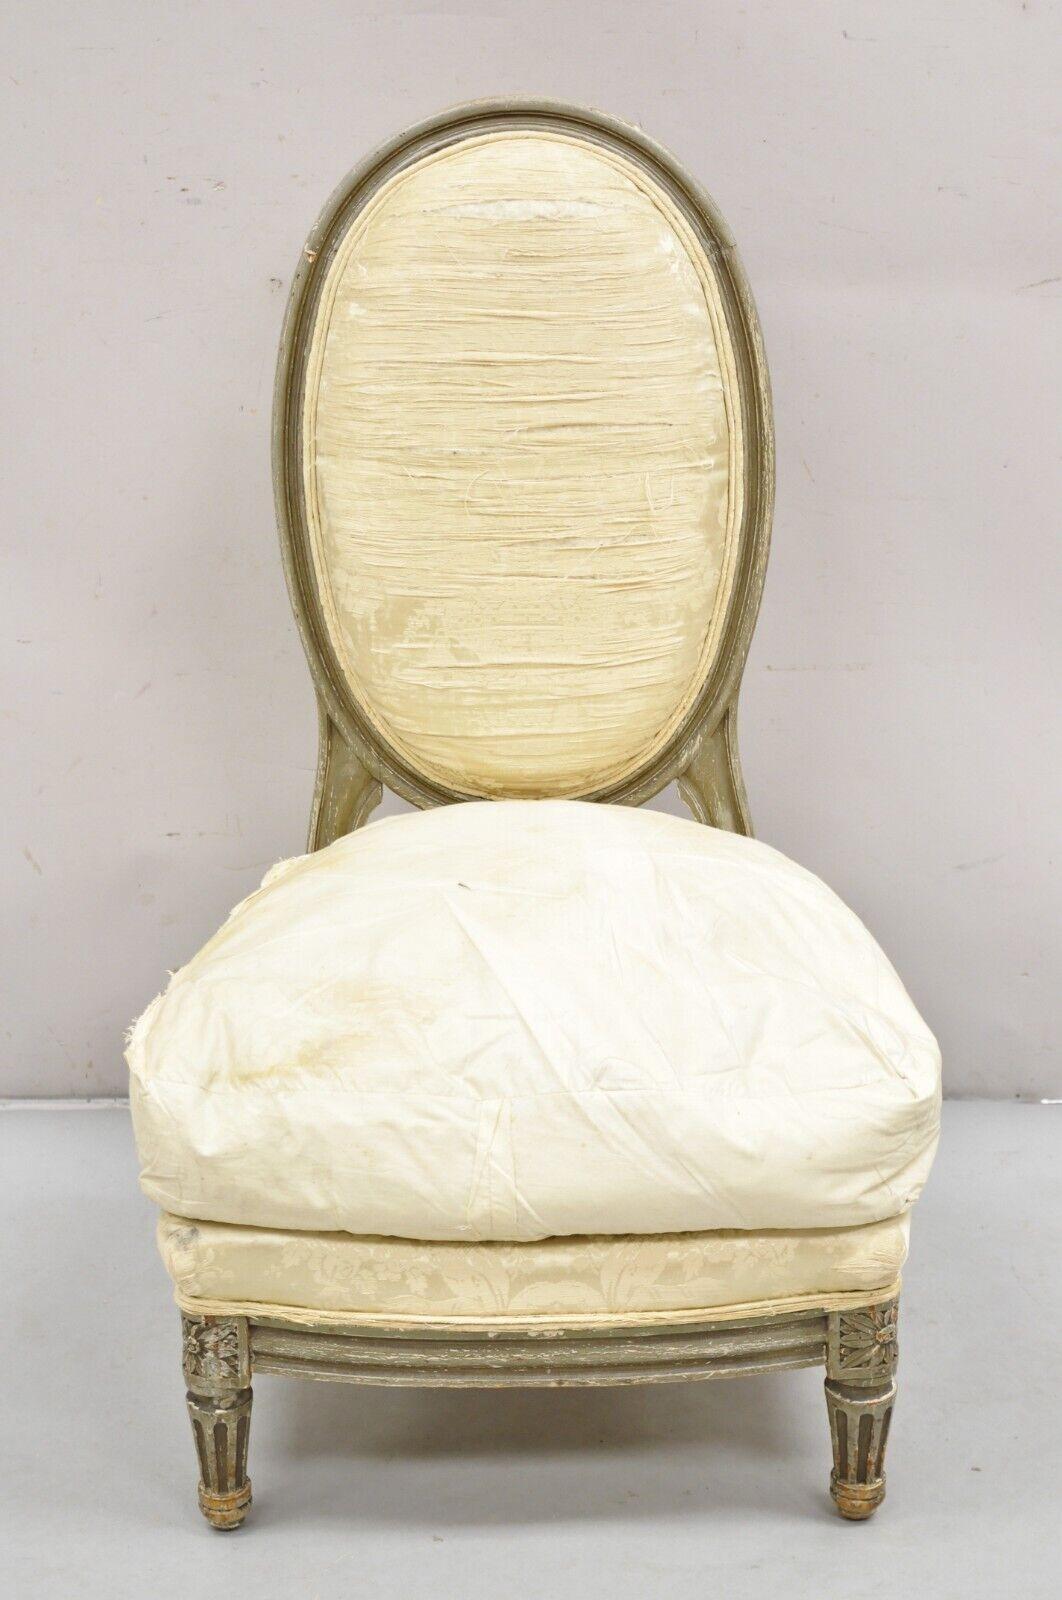 Antique French Louis XVI Style Distress Painted Boudoir Slipper Low Chair attributed to Maison Jansen. Item featured is a low sleek form, solid wood frame, shapely oval back, loose down cushion, quality French craftsmanship. Circa Early 1900s.